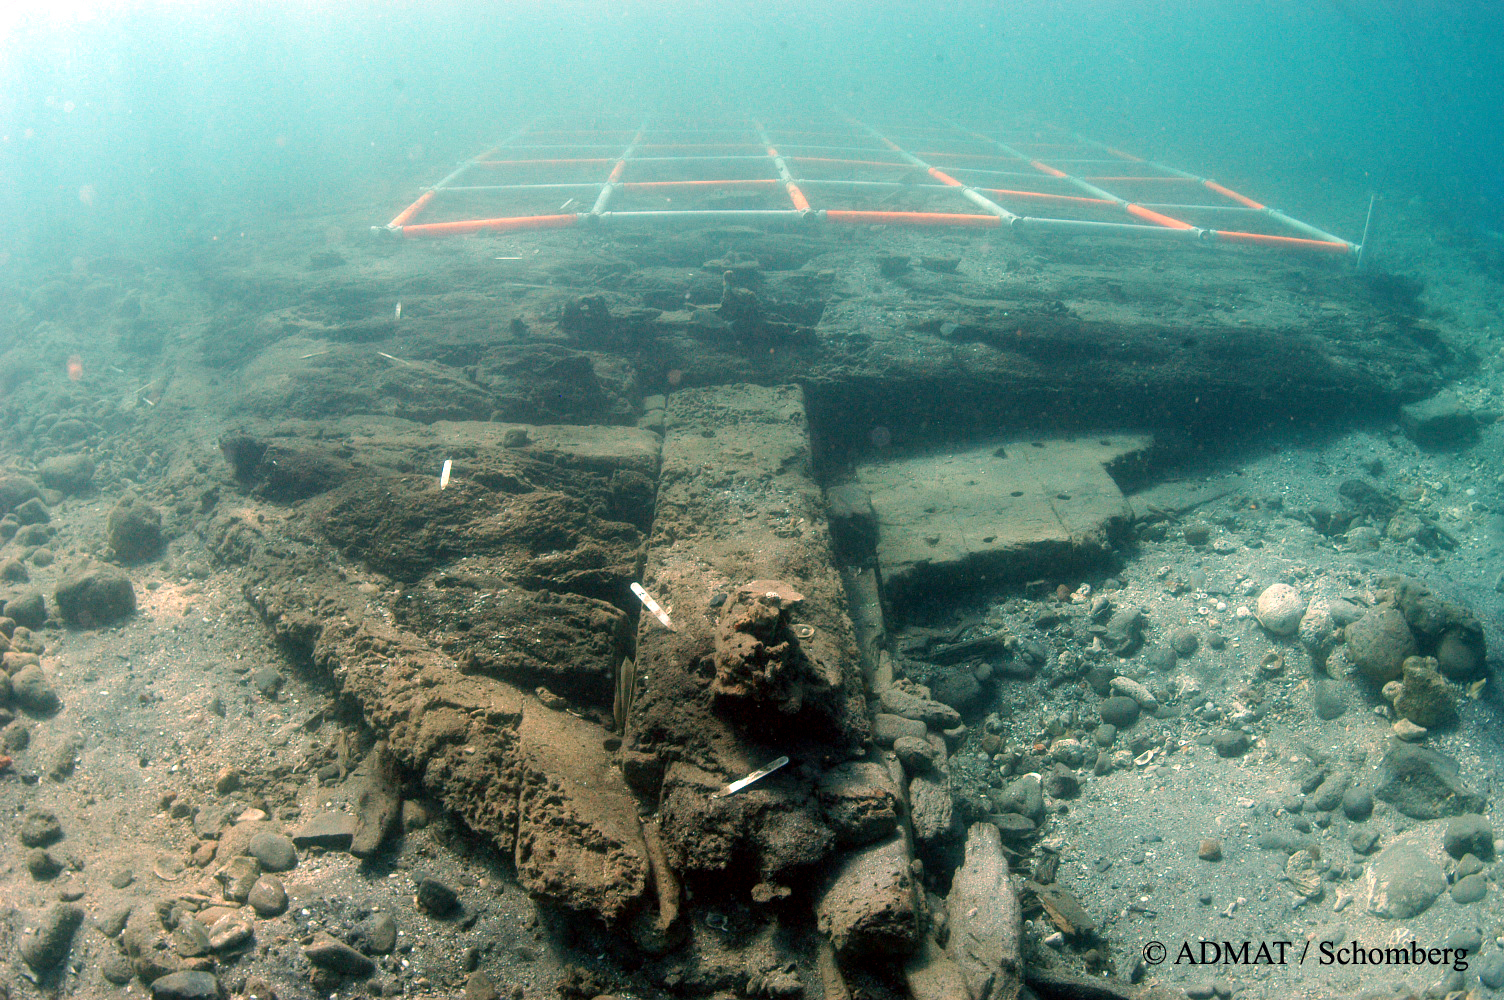  Help Protect Historic Shipwrecks   Take Part    Join our Projects      White House Bay Wreck - Battle of Frigate Bay 1782,&nbsp; St. Kitts. Surveyed 2003. 